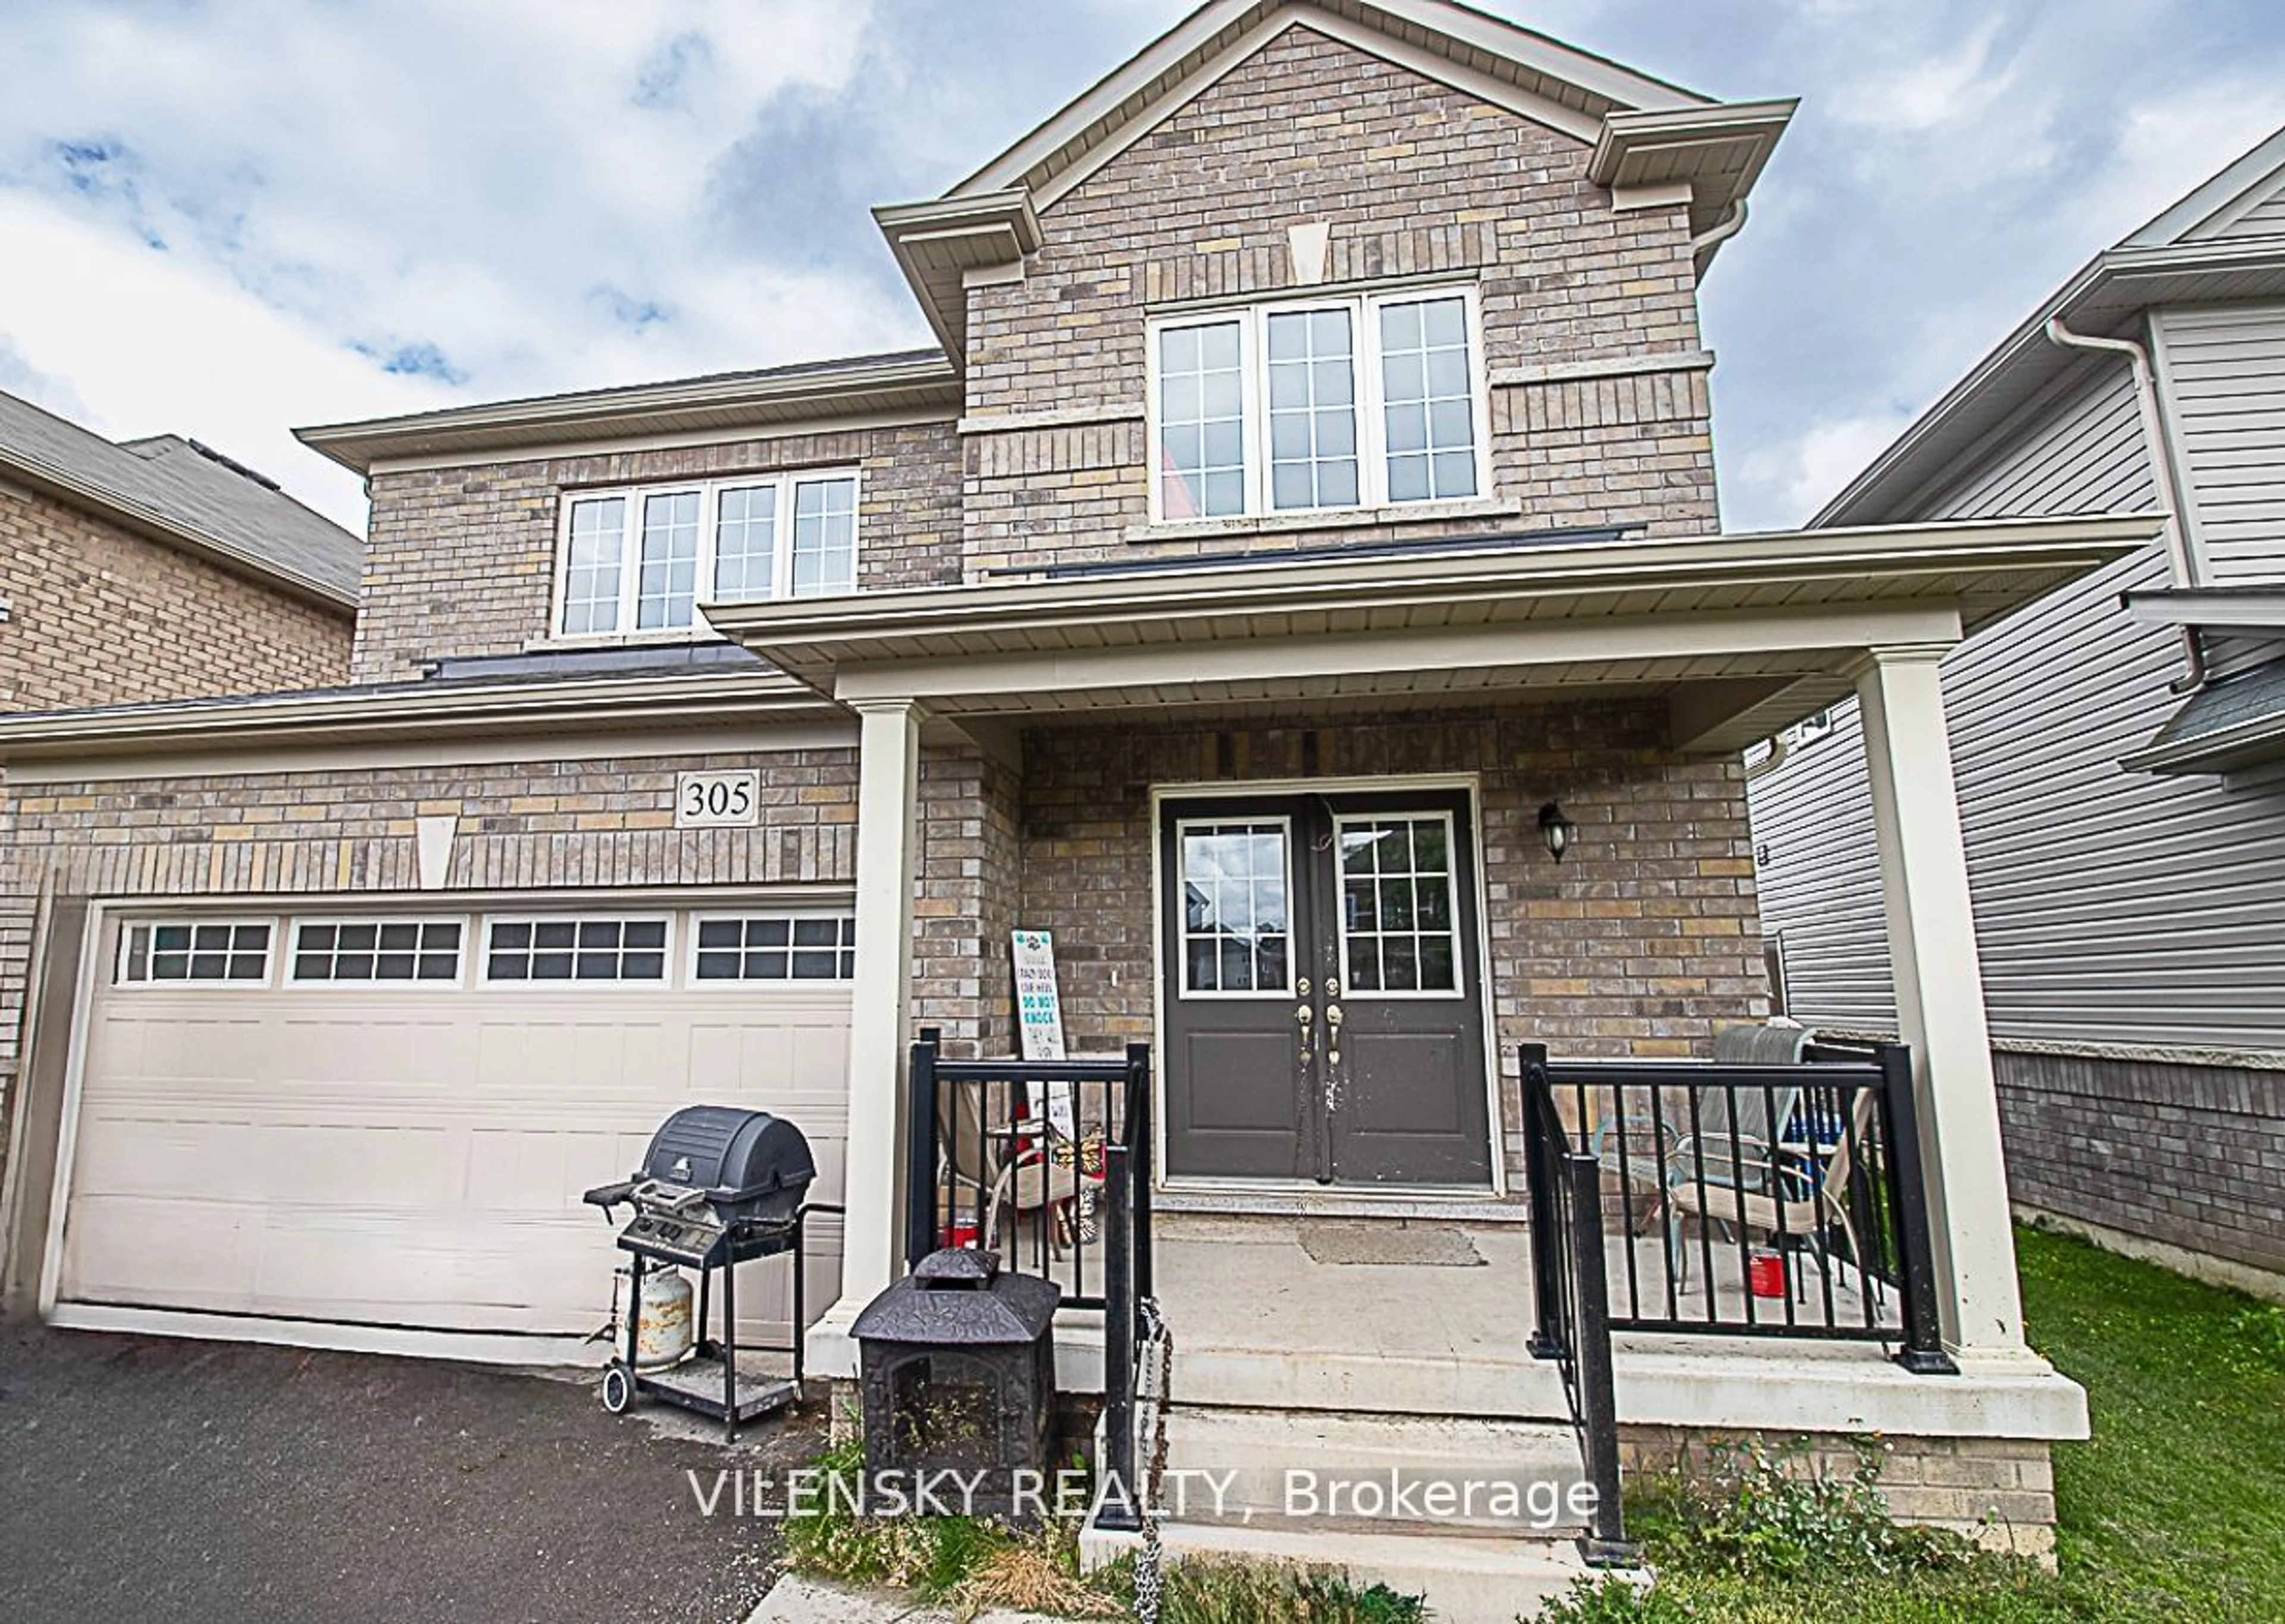 Home with brick exterior material for 305 Van Dusen Ave, Southgate Ontario N0C 1B0